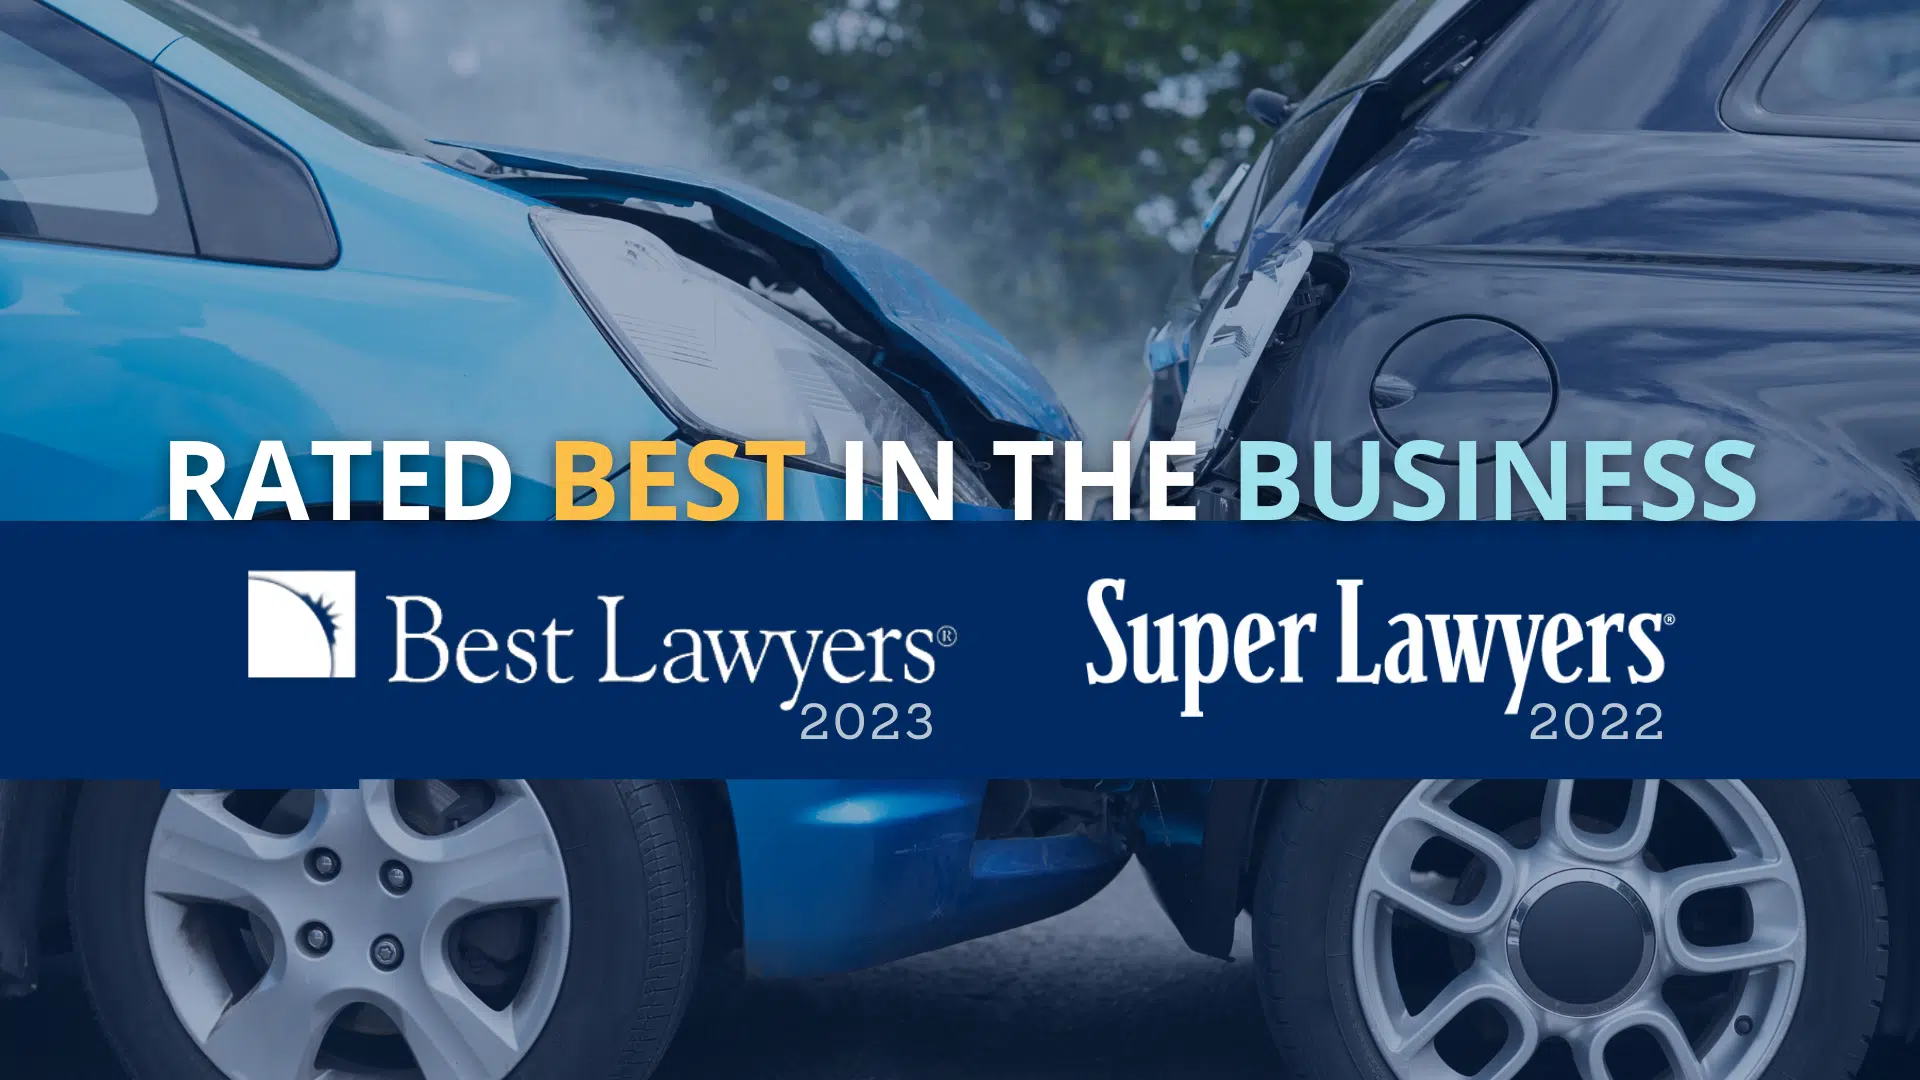 Rated best in the business. Awarded Best Lawyers 2023 and Super Lawyers 2022.